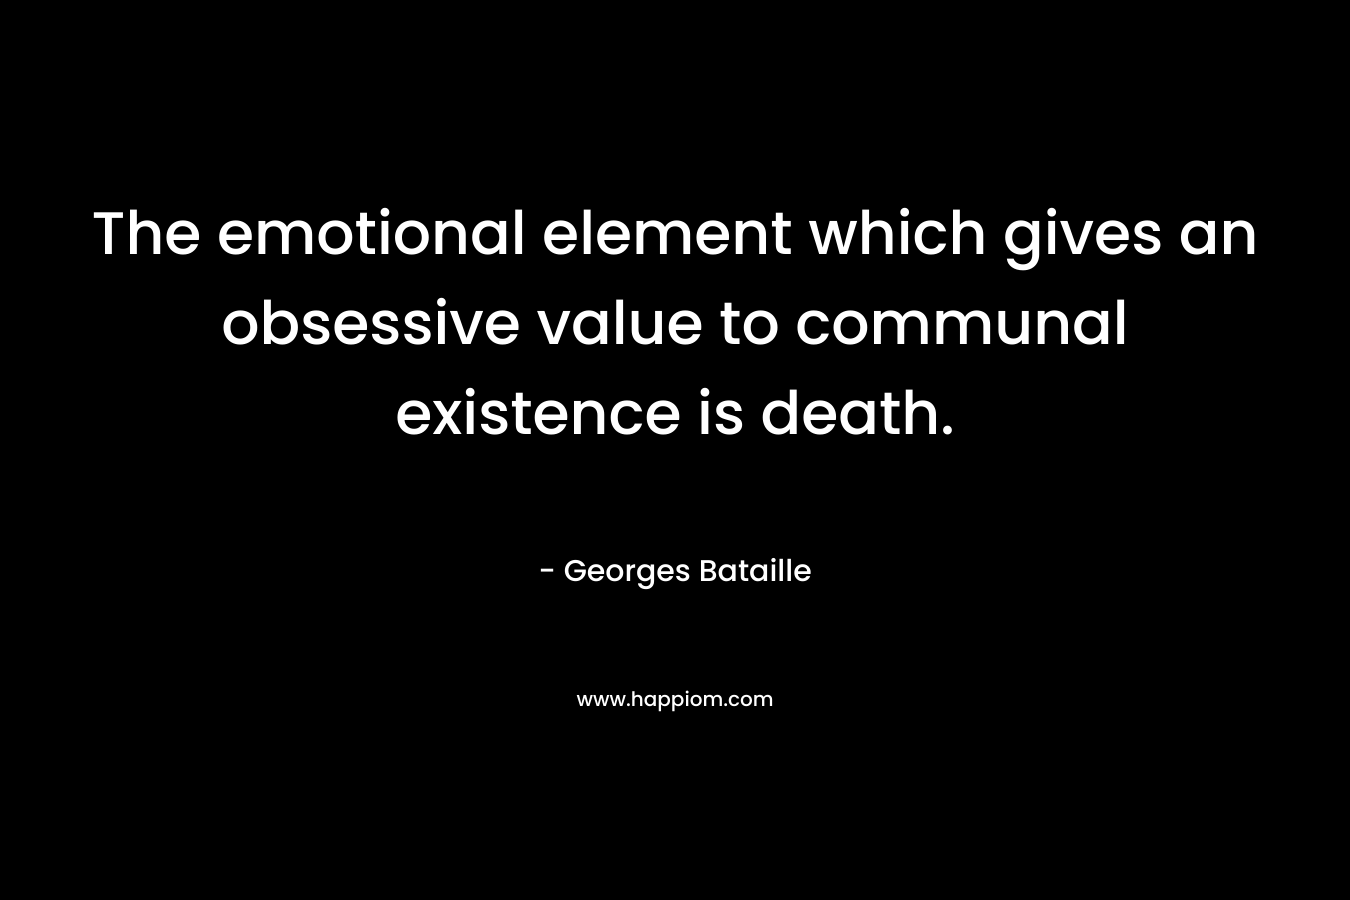 The emotional element which gives an obsessive value to communal existence is death. – Georges Bataille